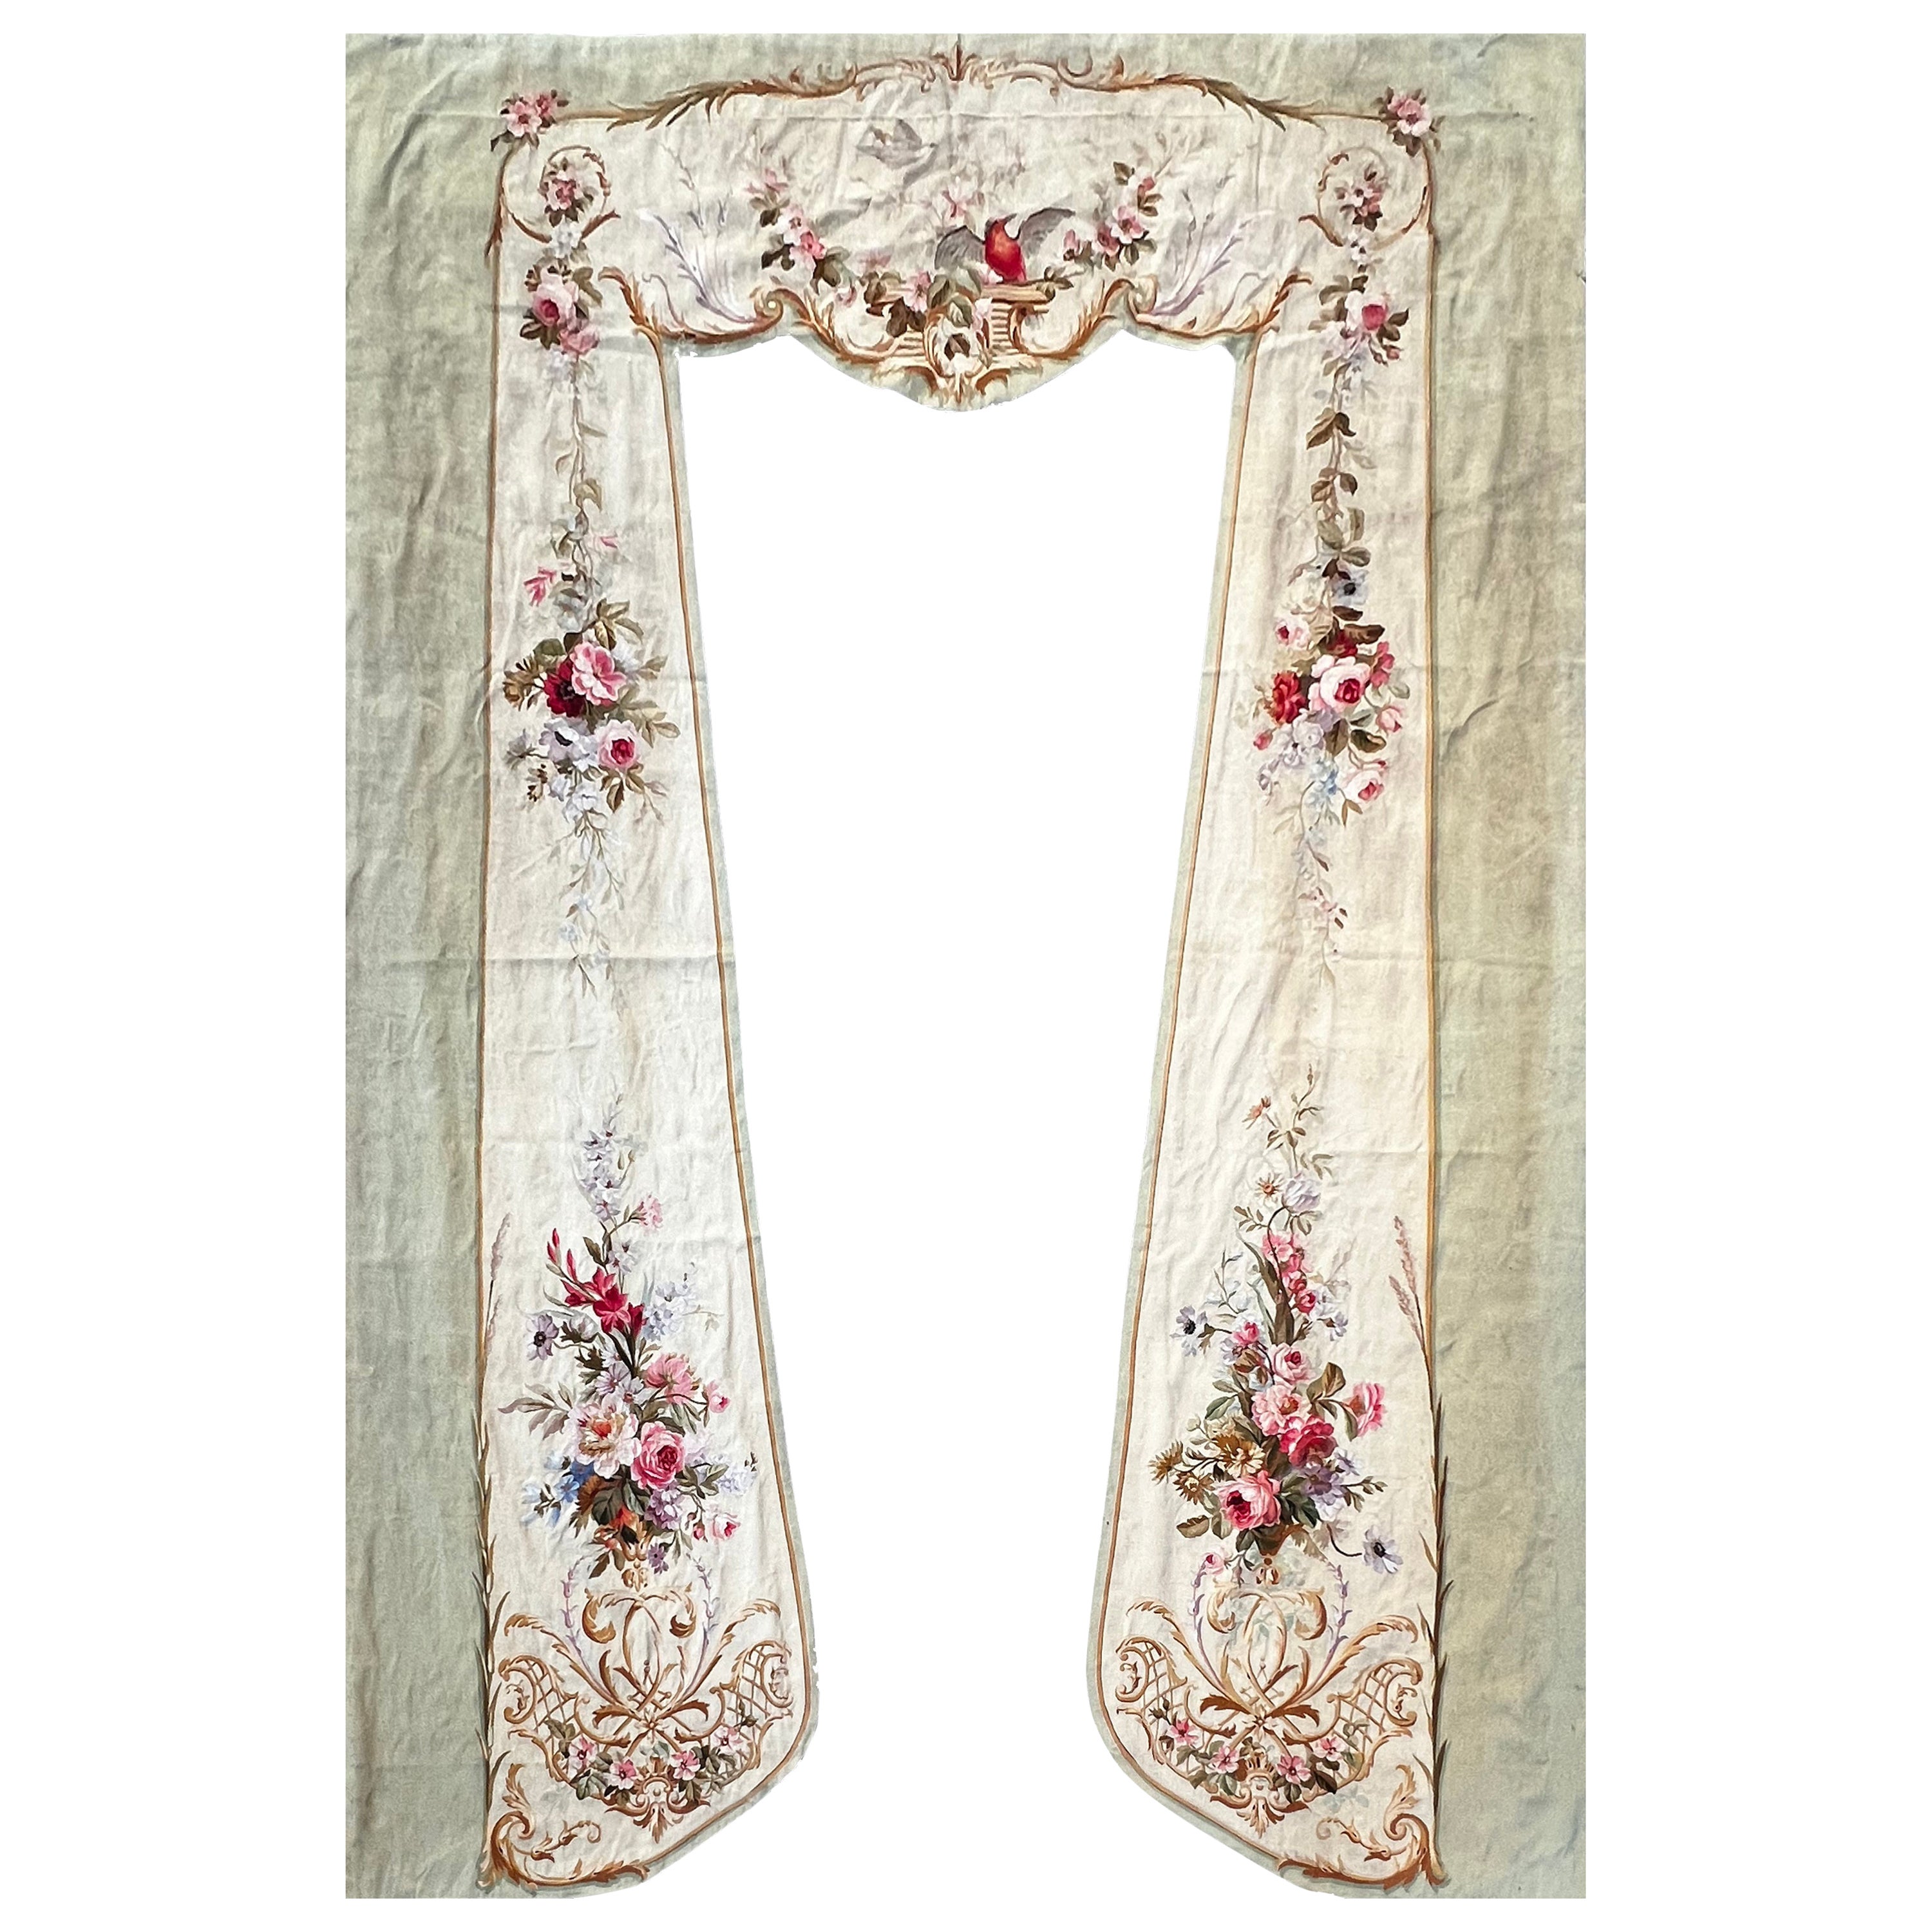 19th century Aubusson Tapestry Valance - 3m27x2m22 - No. 1356 For Sale